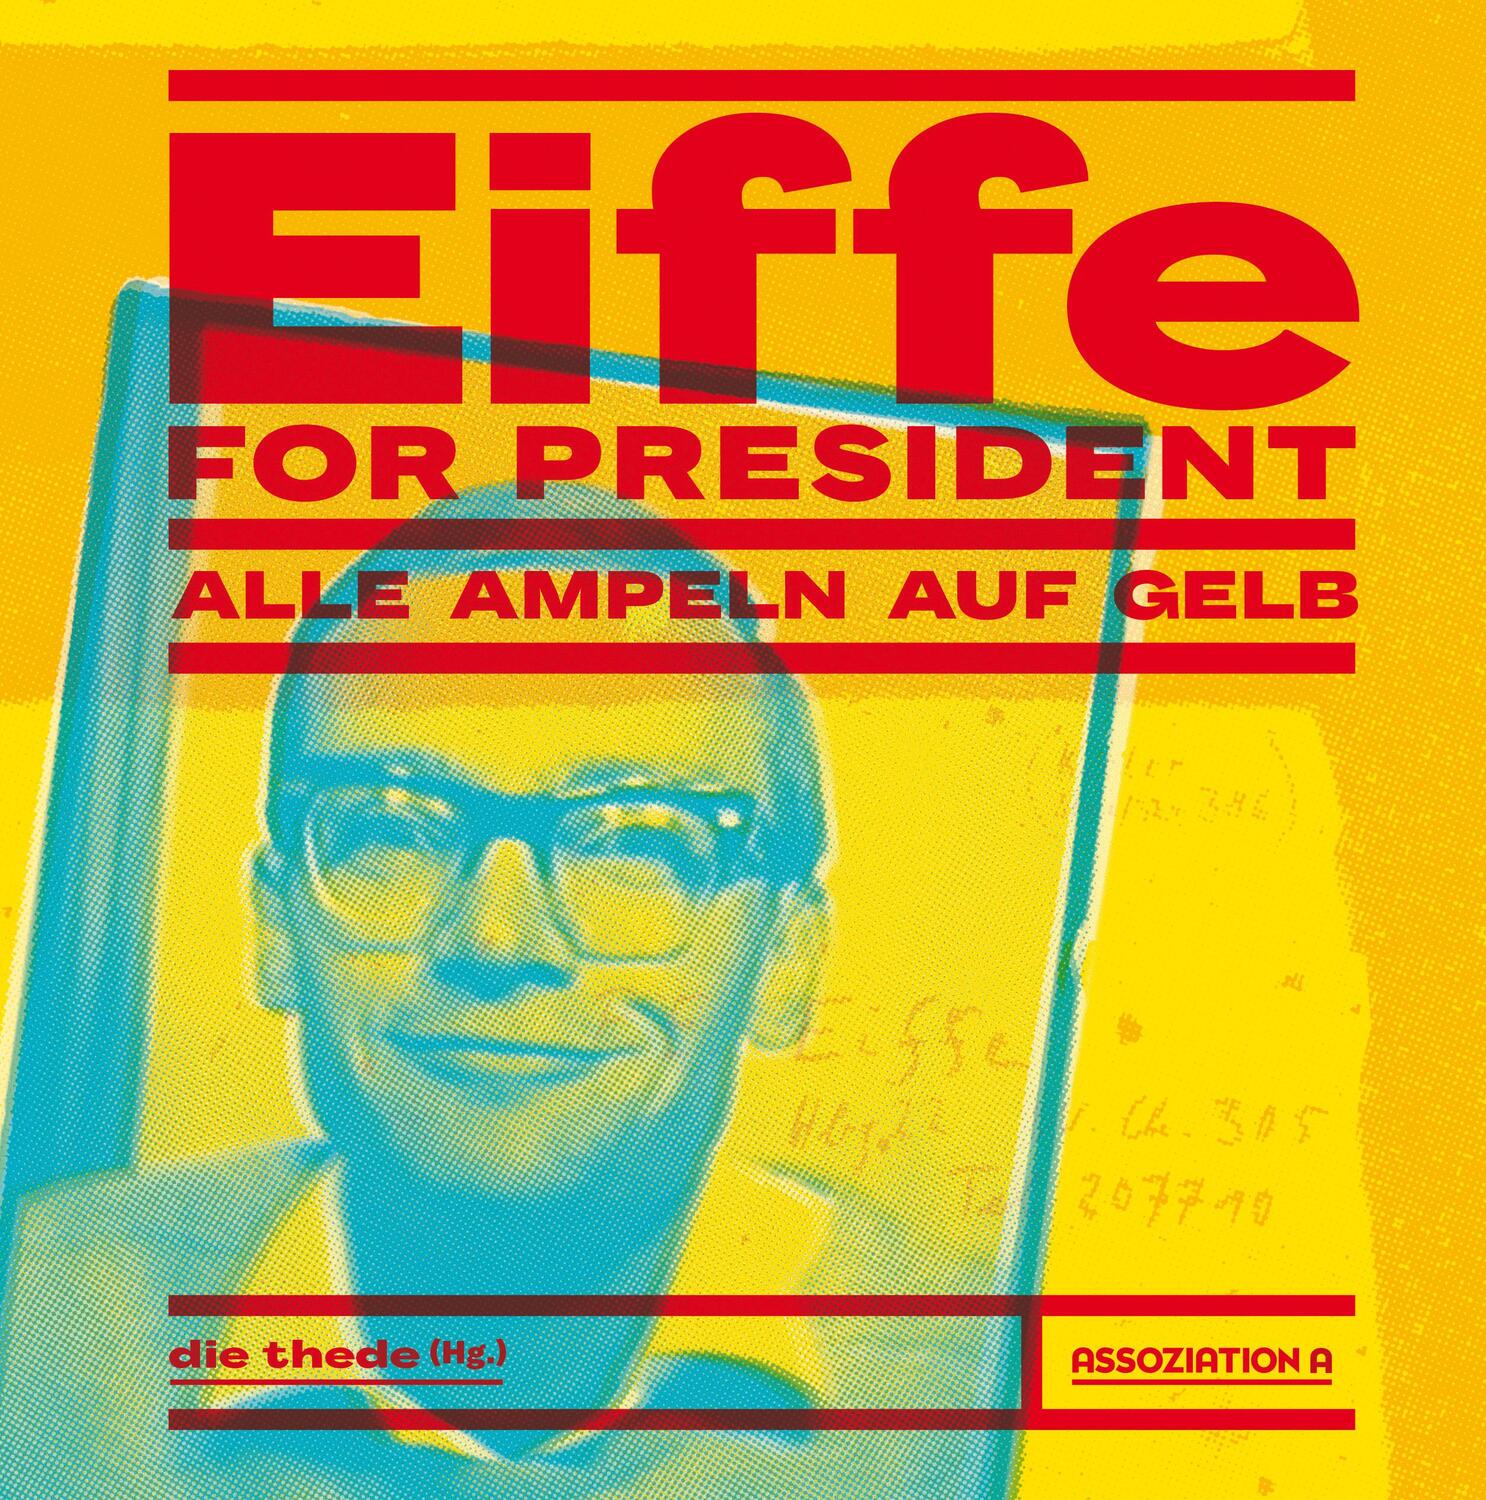 Eiffe for President - die thede e.V.